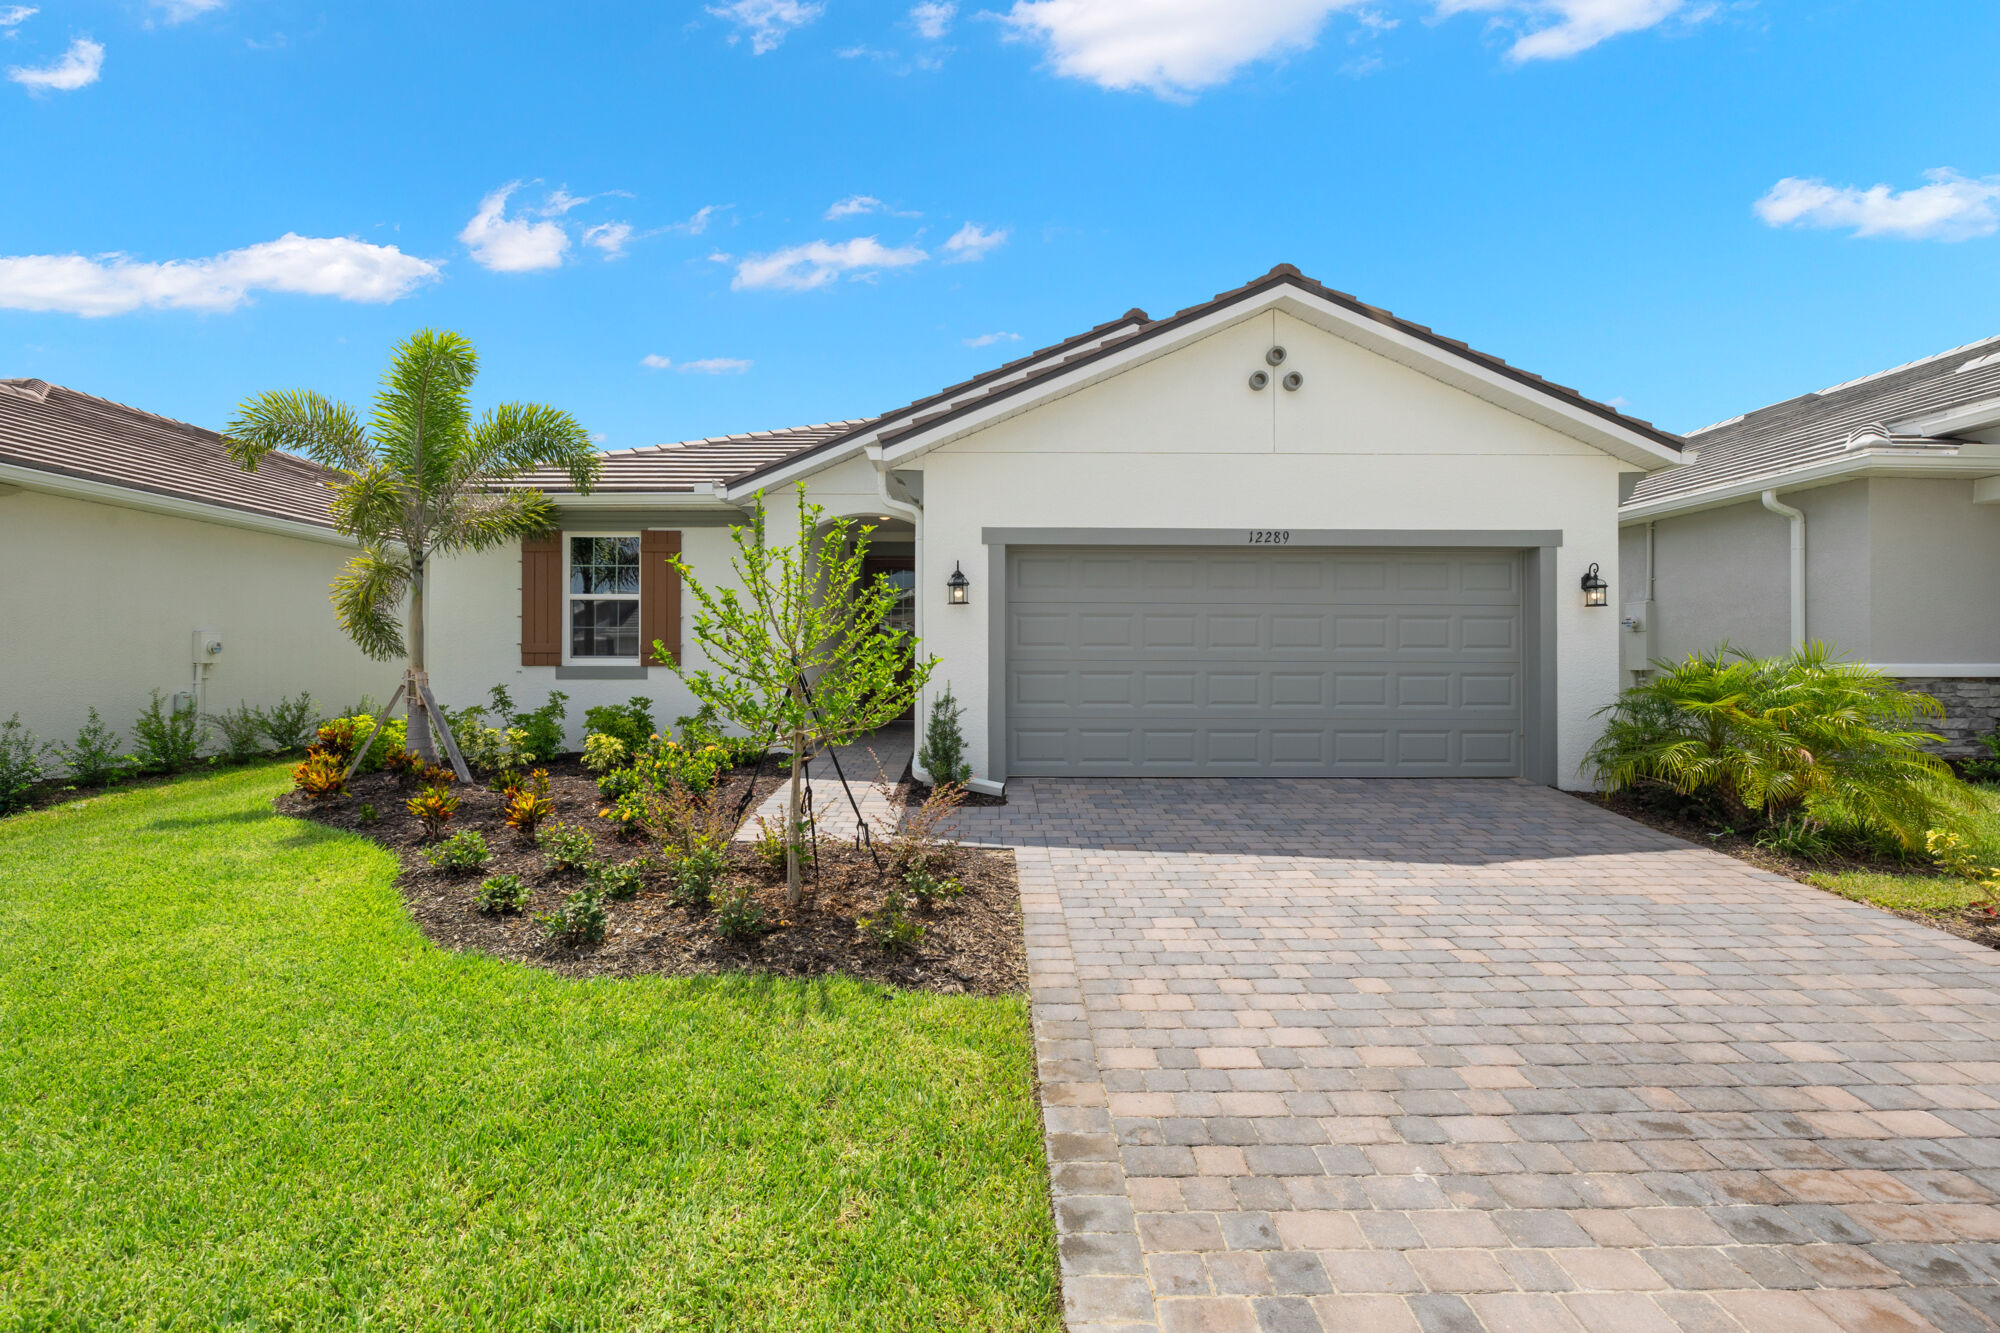 single story, 3 bedrooms, 2 bathrooms, powder room, flex room, open concept plan, breakfast bar can seat up to 7, pantry, walk-in closet in owners suite, bedrooms 2 and 3 share a full hall bath, 2-car garage, flex room has a walk-in closet